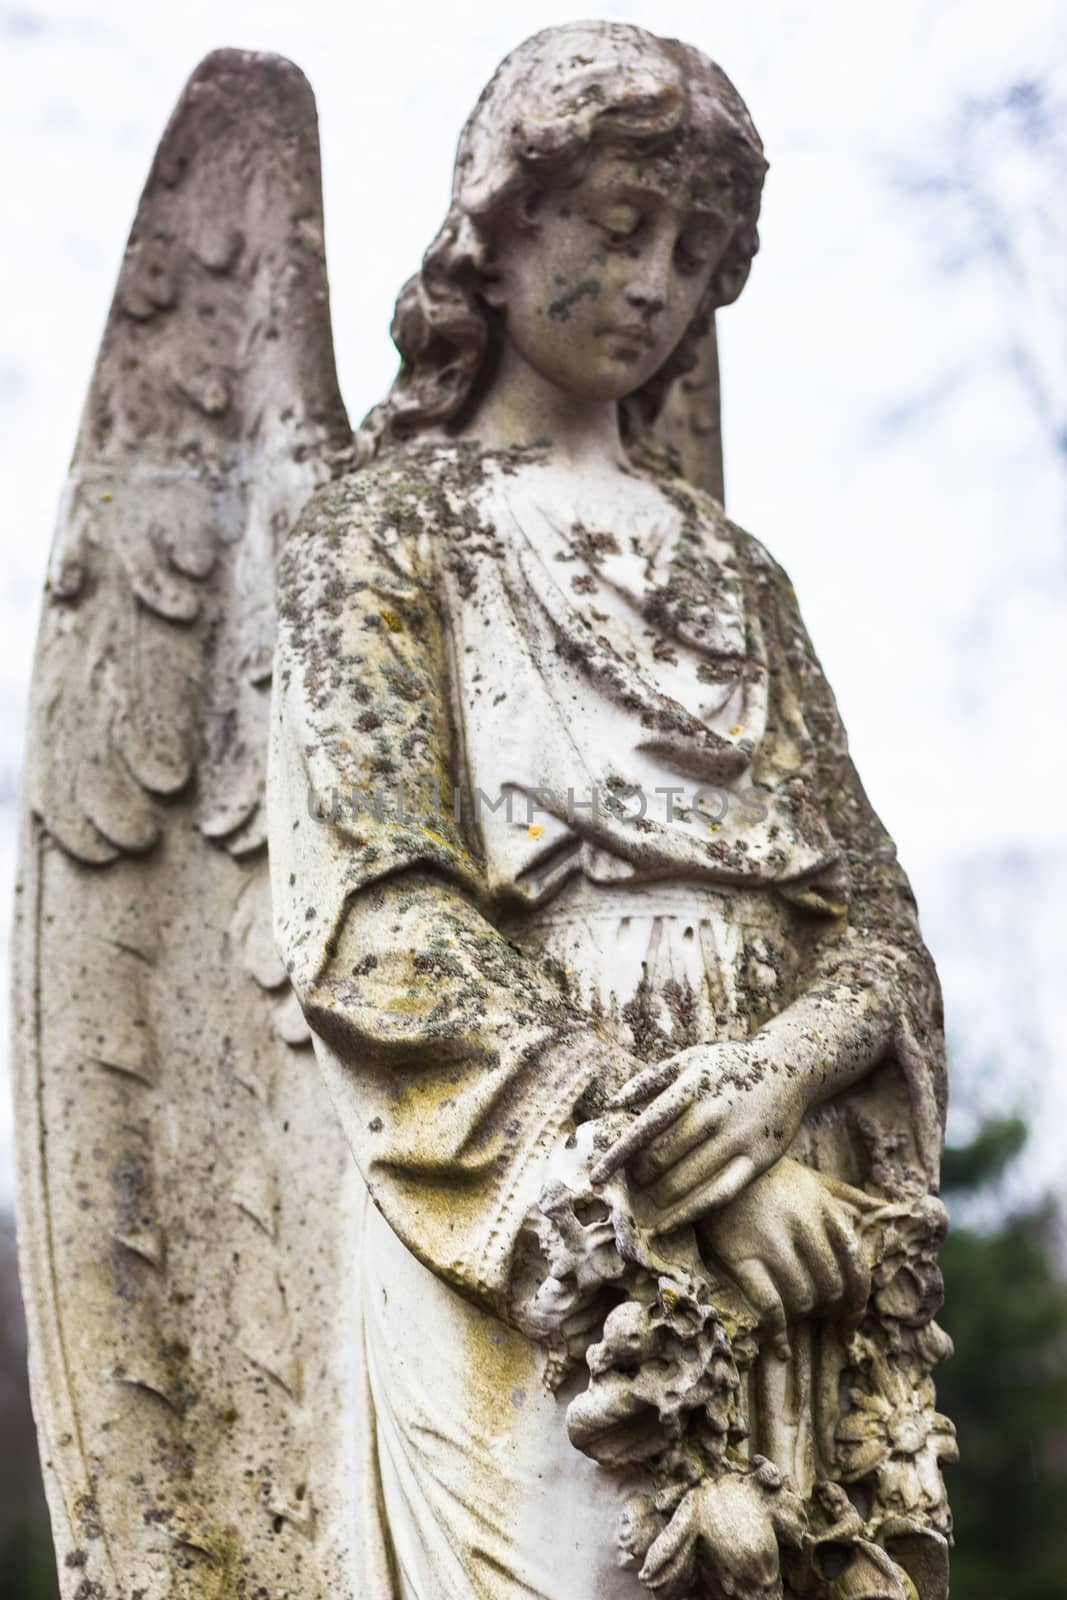 Old cemetery marble sculpture of the angel.